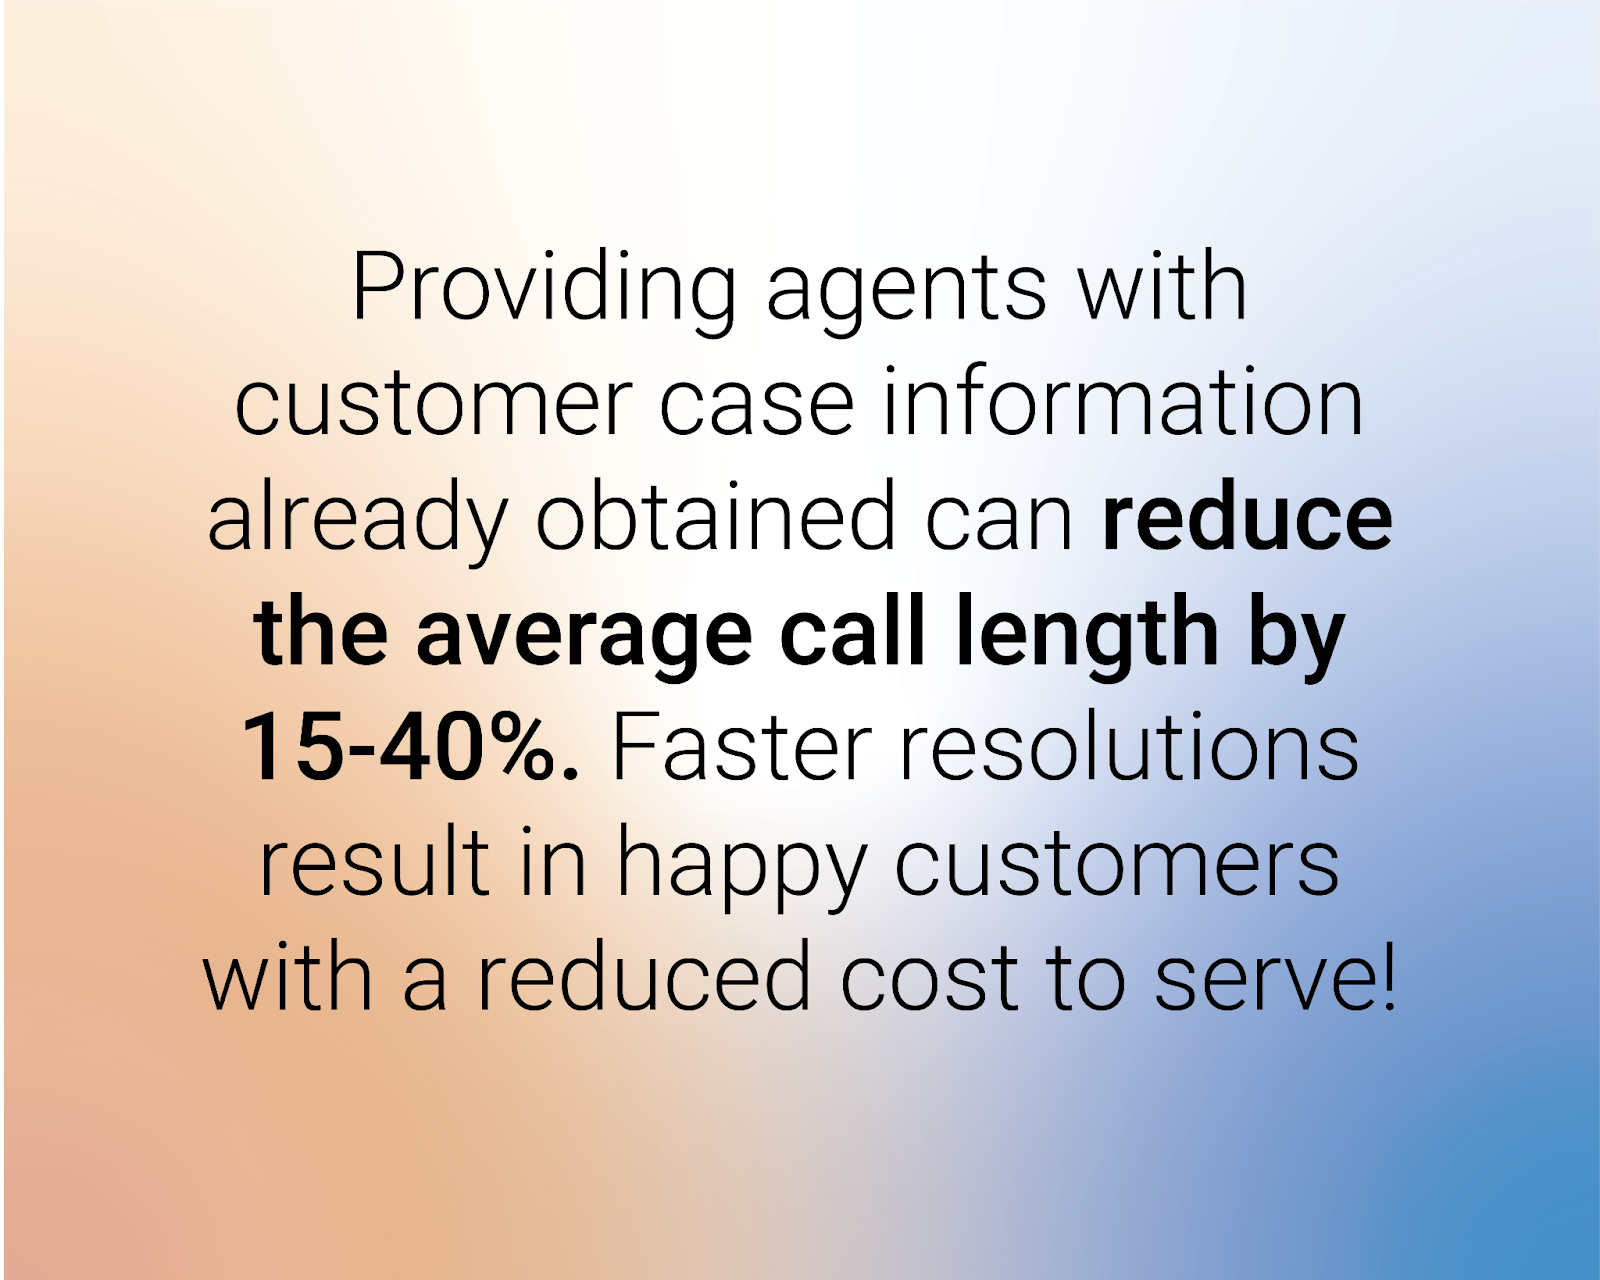 Providing agents with customer case information already obtained can reduce the average call length by 15-40%. Faster resolutions result in happy customers with a reduced cost to serve!